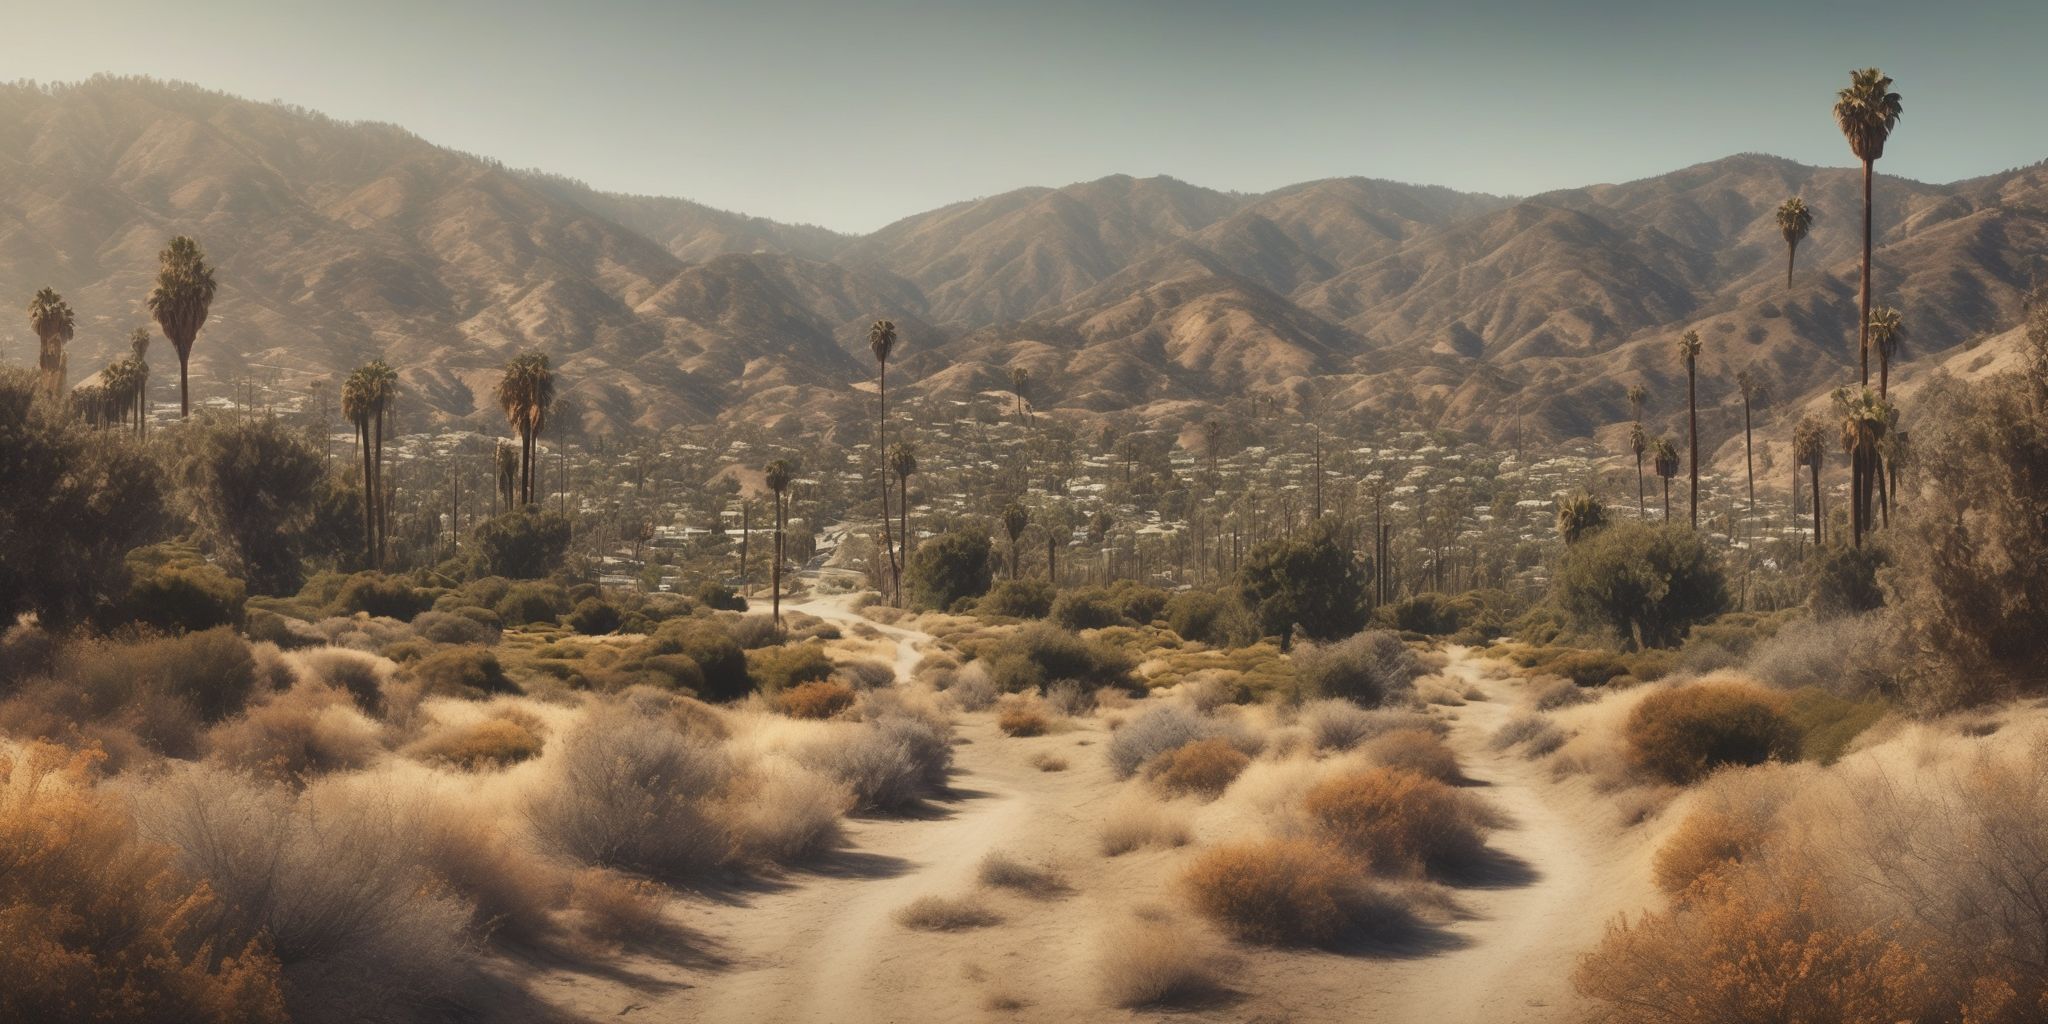 California  in realistic, photographic style